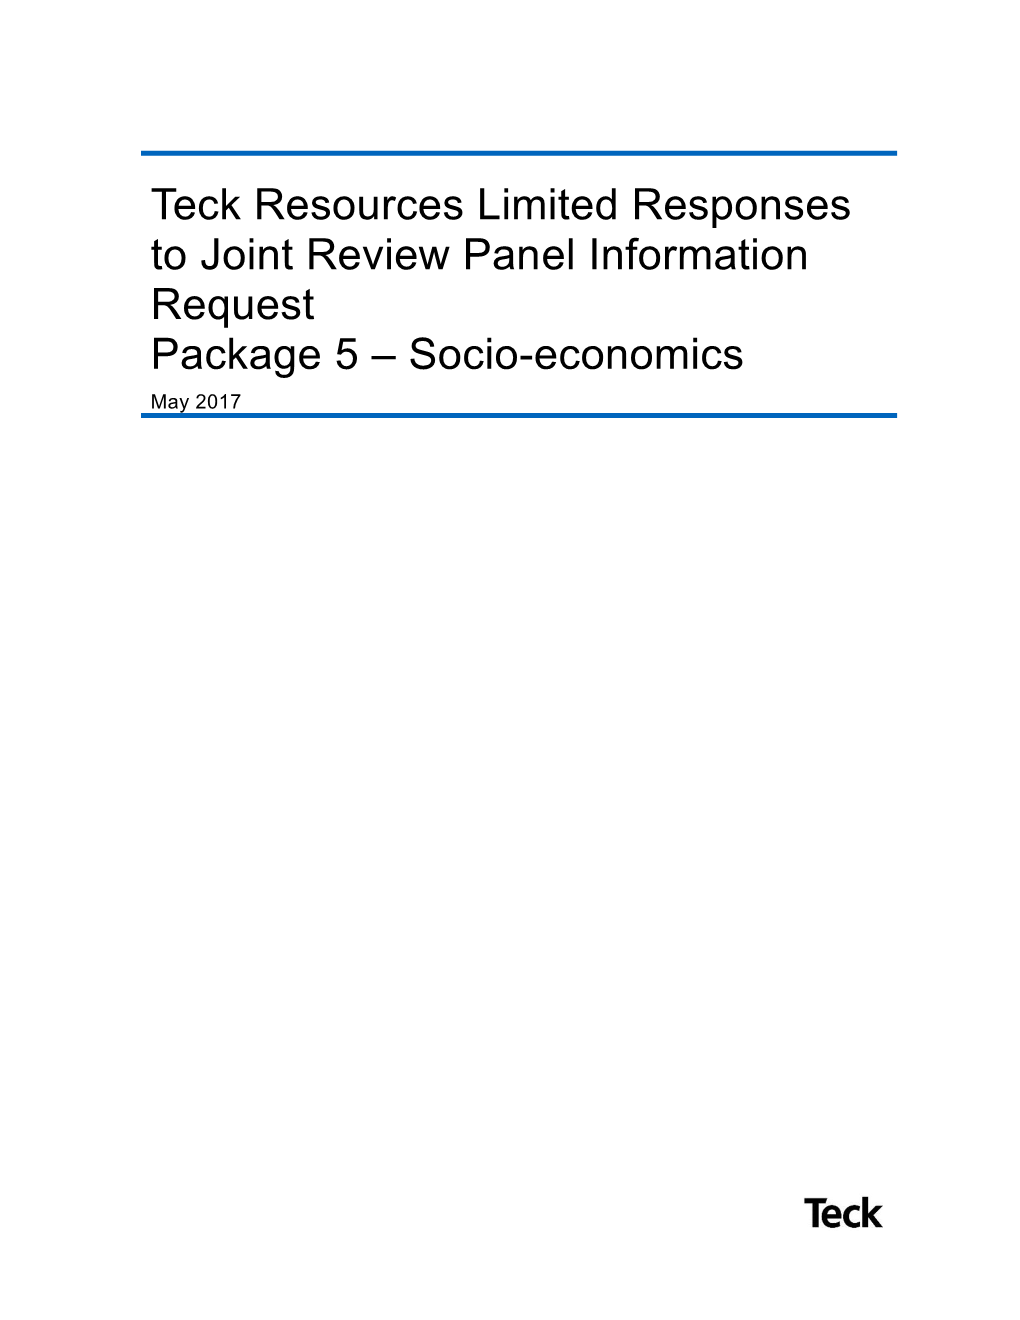 Teck Resources Limited Responses to Joint Review Panel Information Request Package 5 – Socio-Economics May 2017